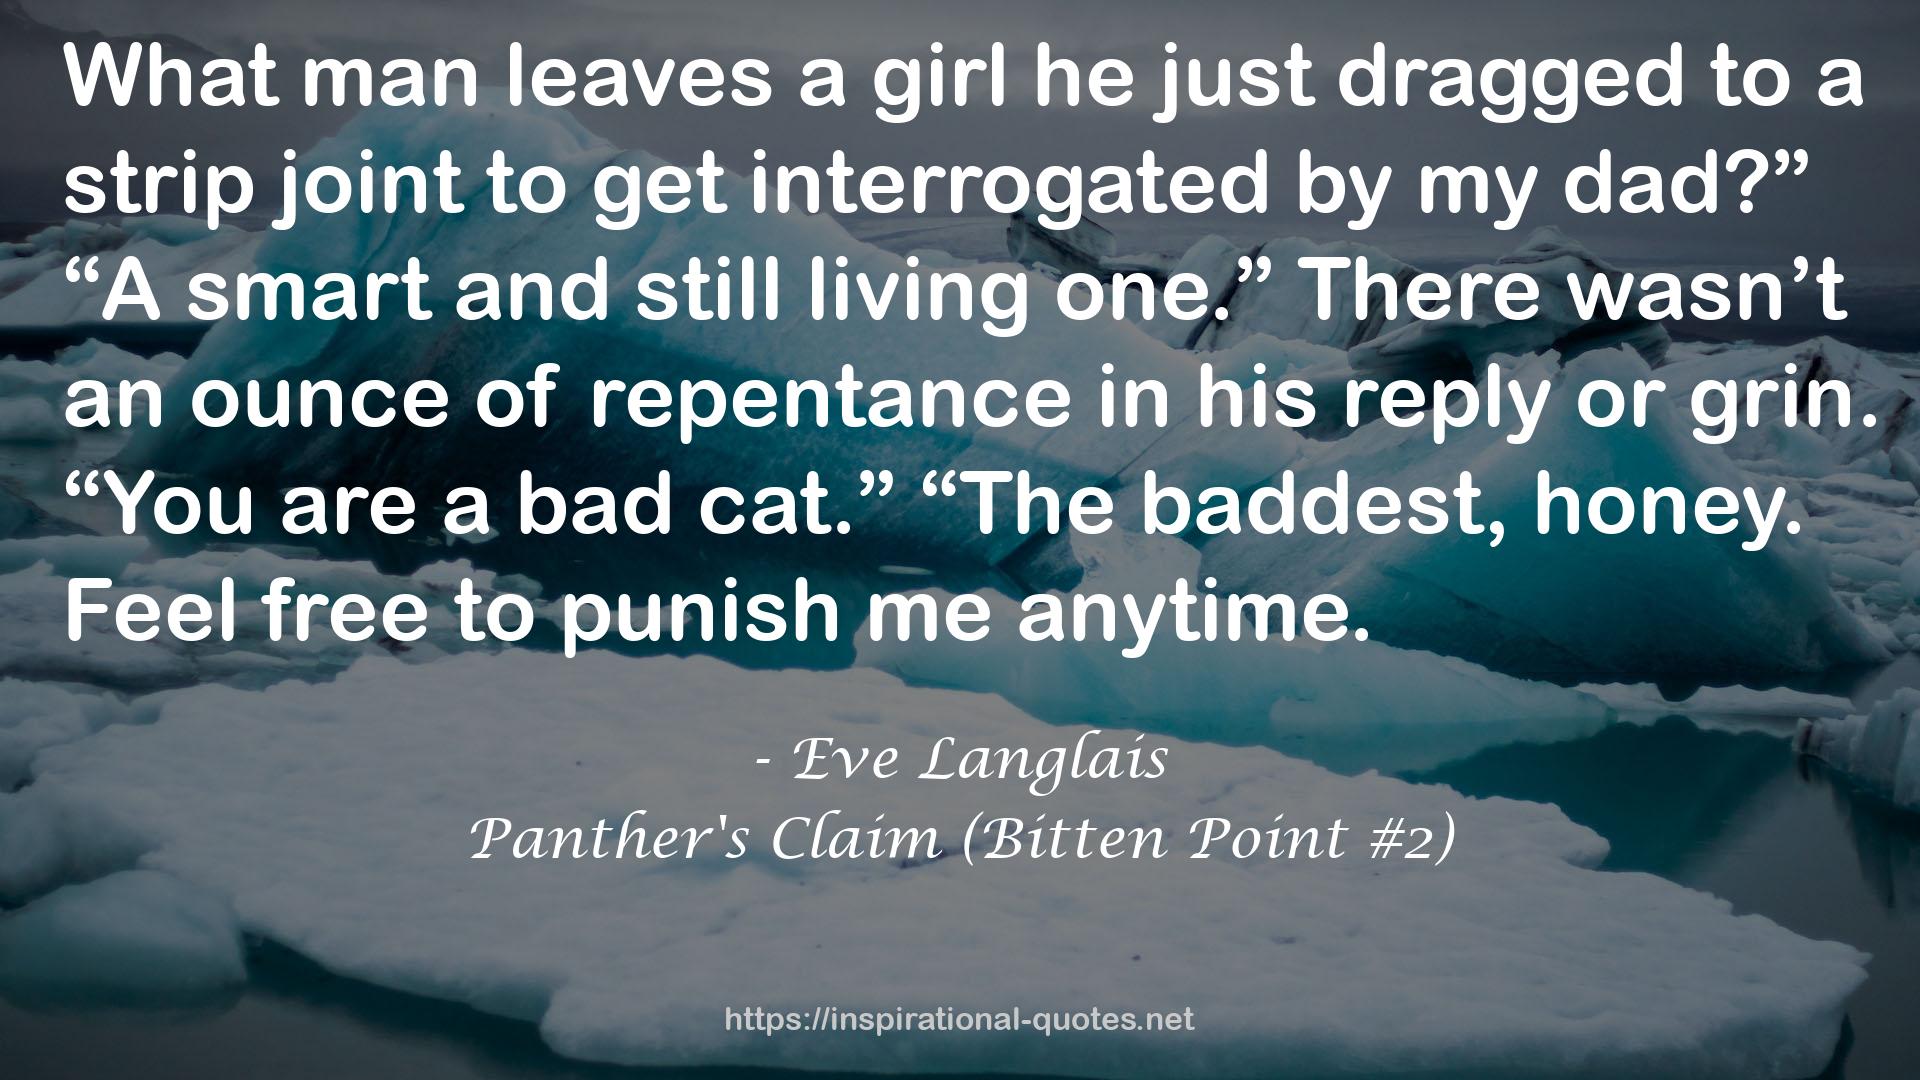 Panther's Claim (Bitten Point #2) QUOTES